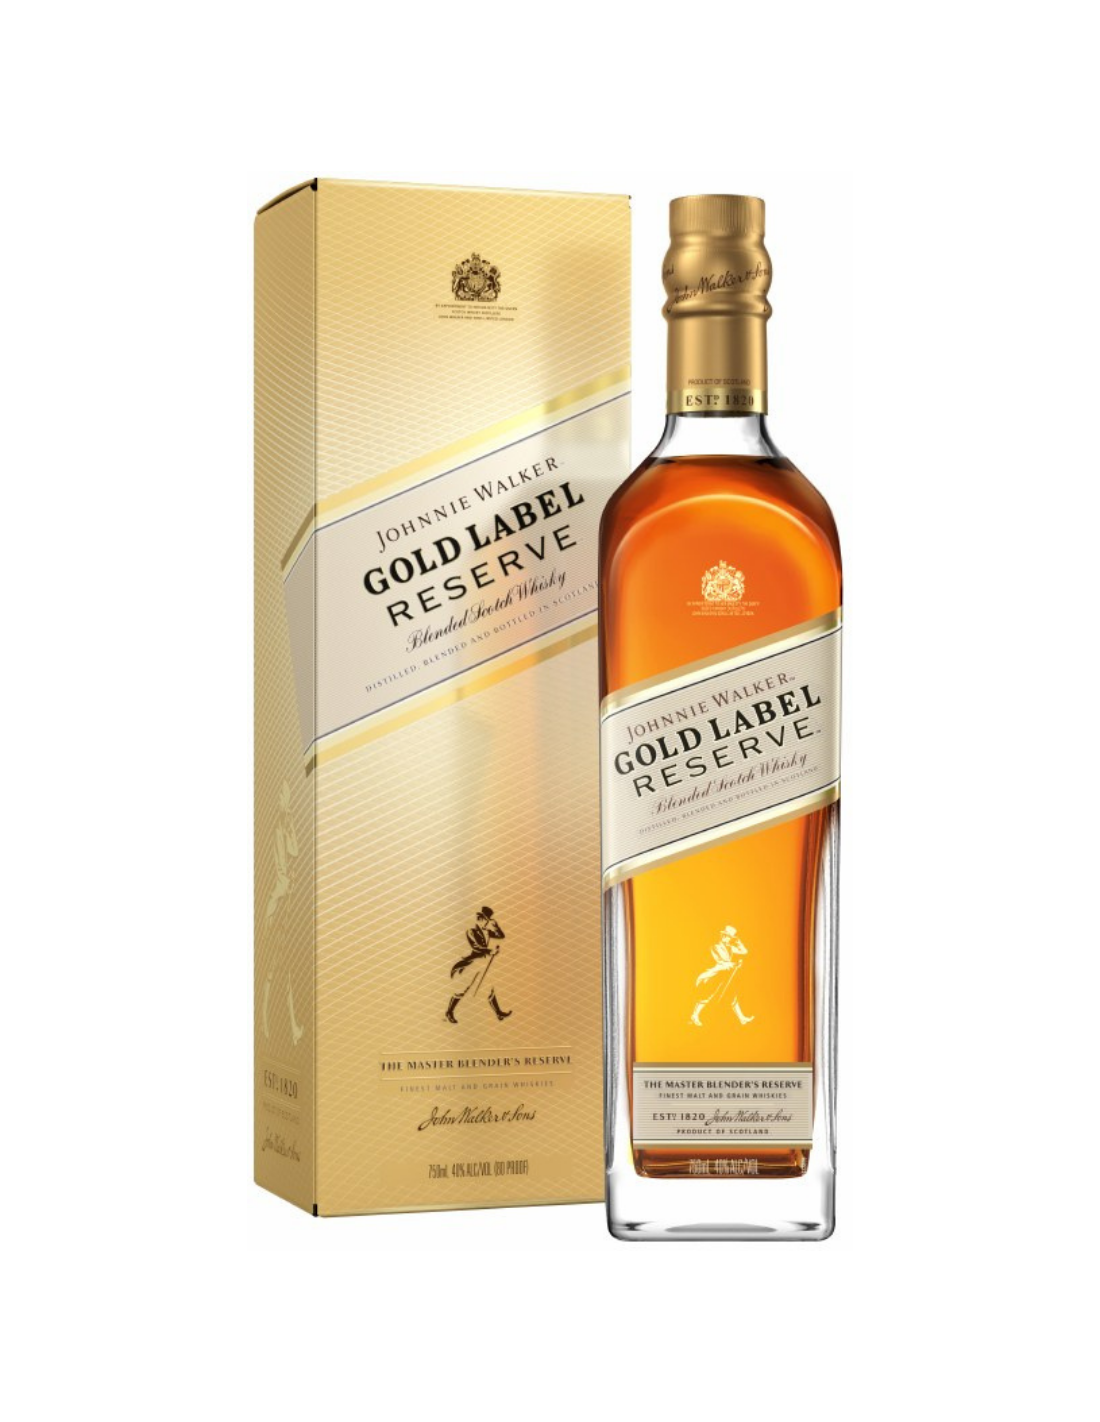 Whisky Johnnie Walker Gold Label Reserve, 0.7L, 40% alc., Scotia alcooldiscount.ro